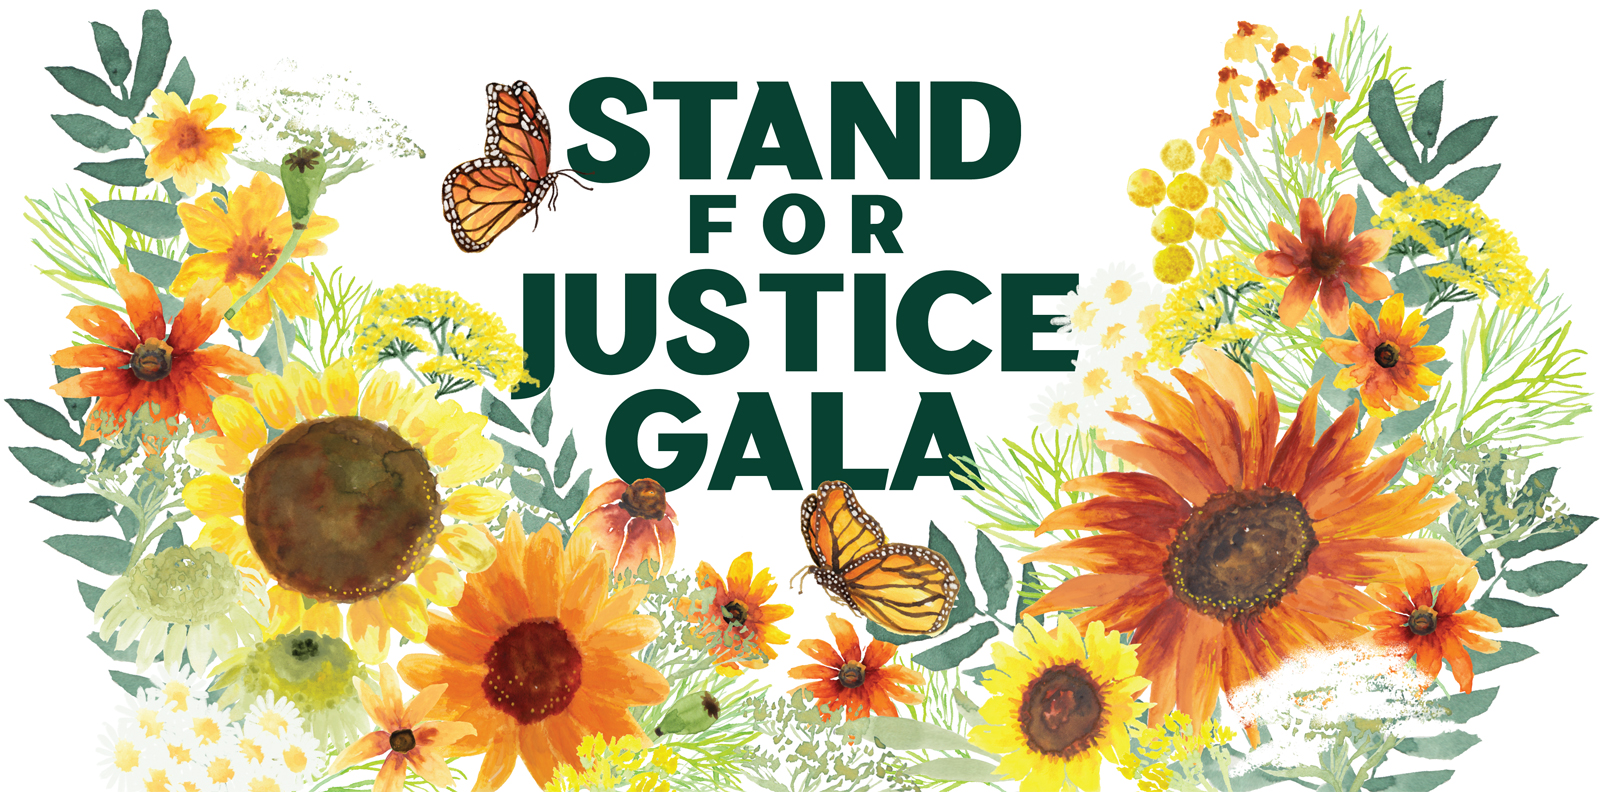 2023 Stand for Justice Gala main image filled with handdrawn fall flowers in warm reds and yellows,and butterflies.